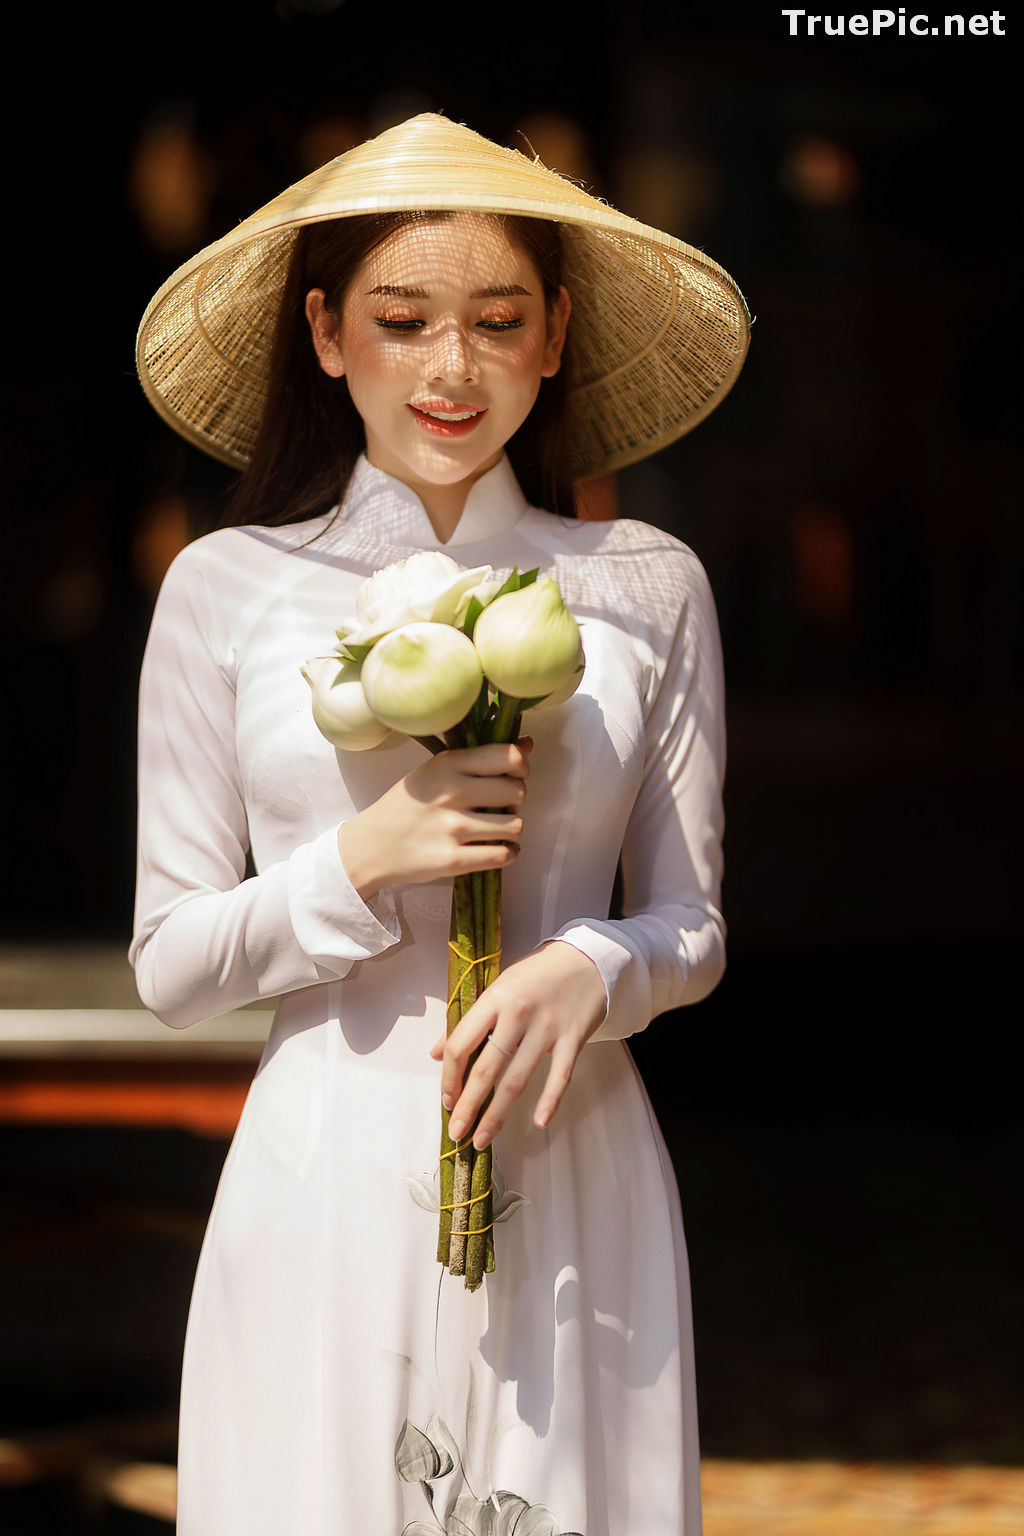 Image The Beauty of Vietnamese Girls with Traditional Dress (Ao Dai) #2 - TruePic.net - Picture-65